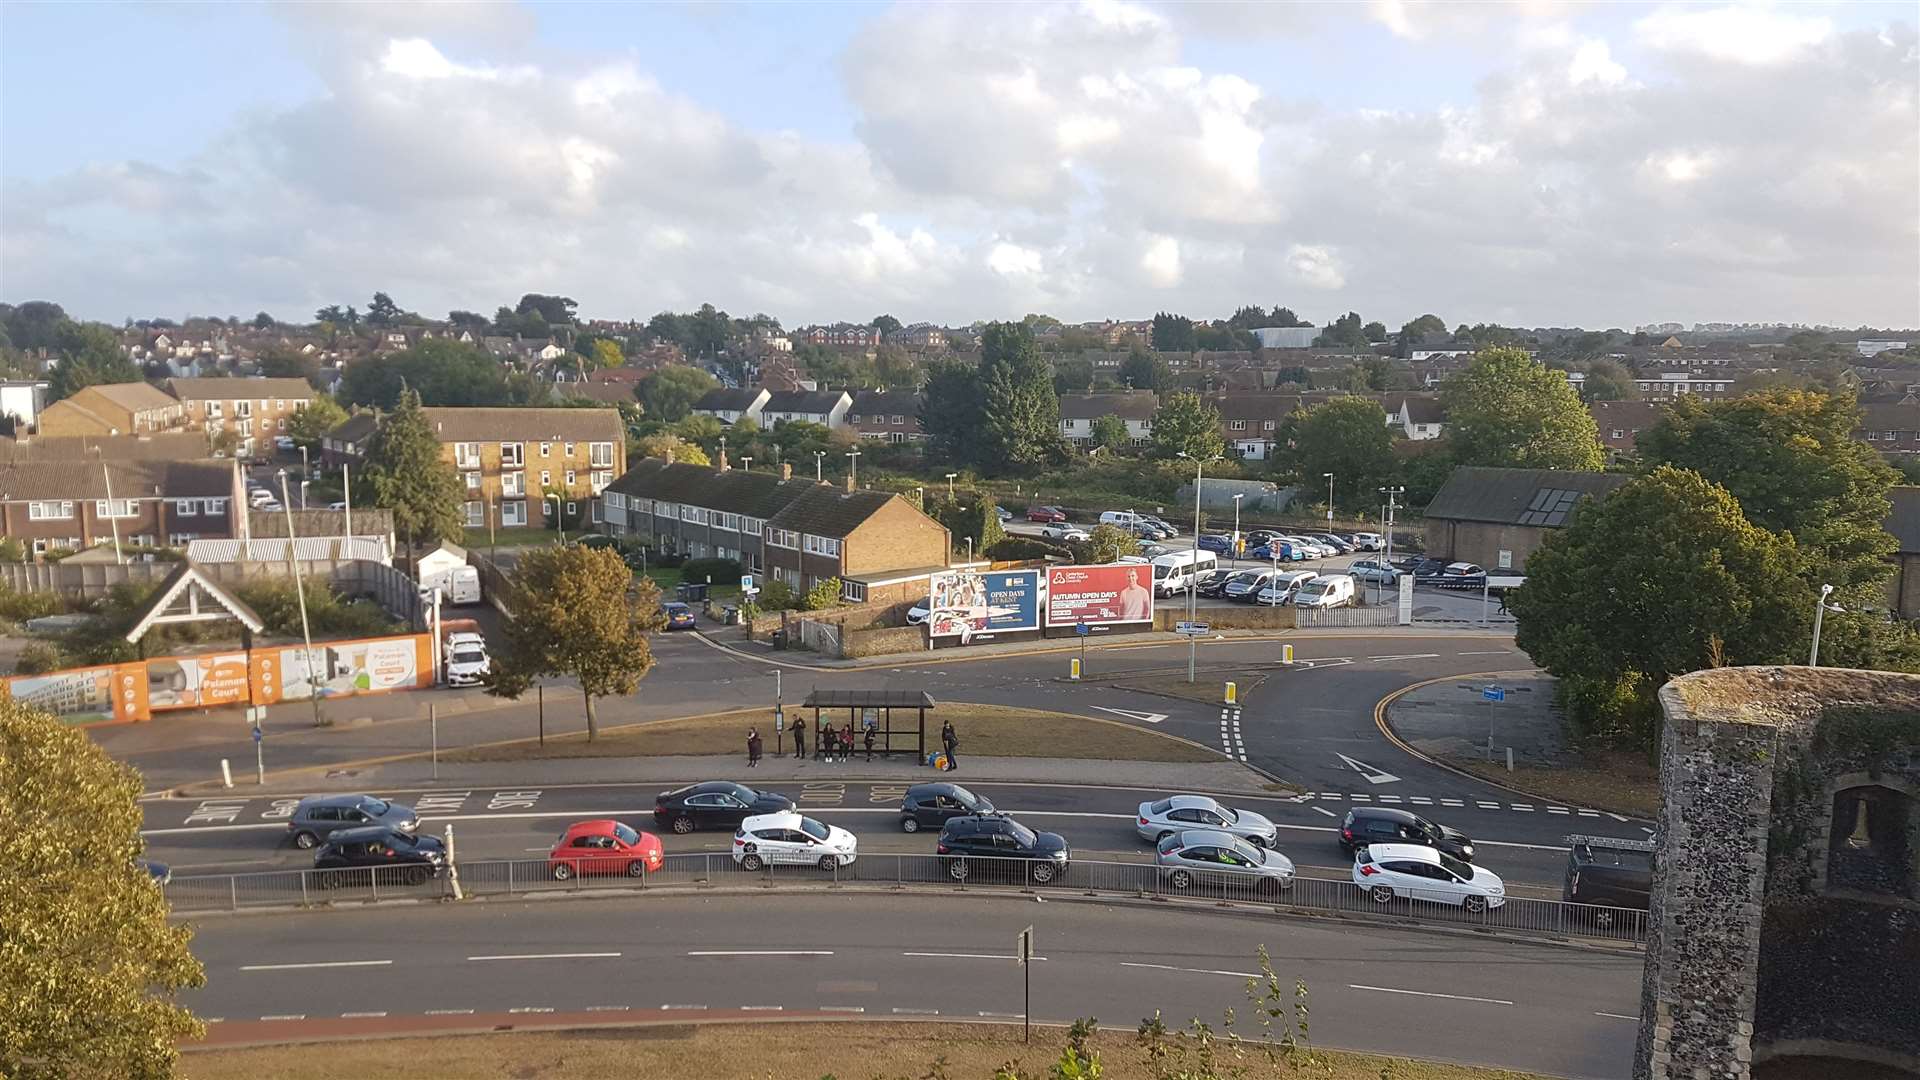 The view of the ring-road from the top of the Dane John mound